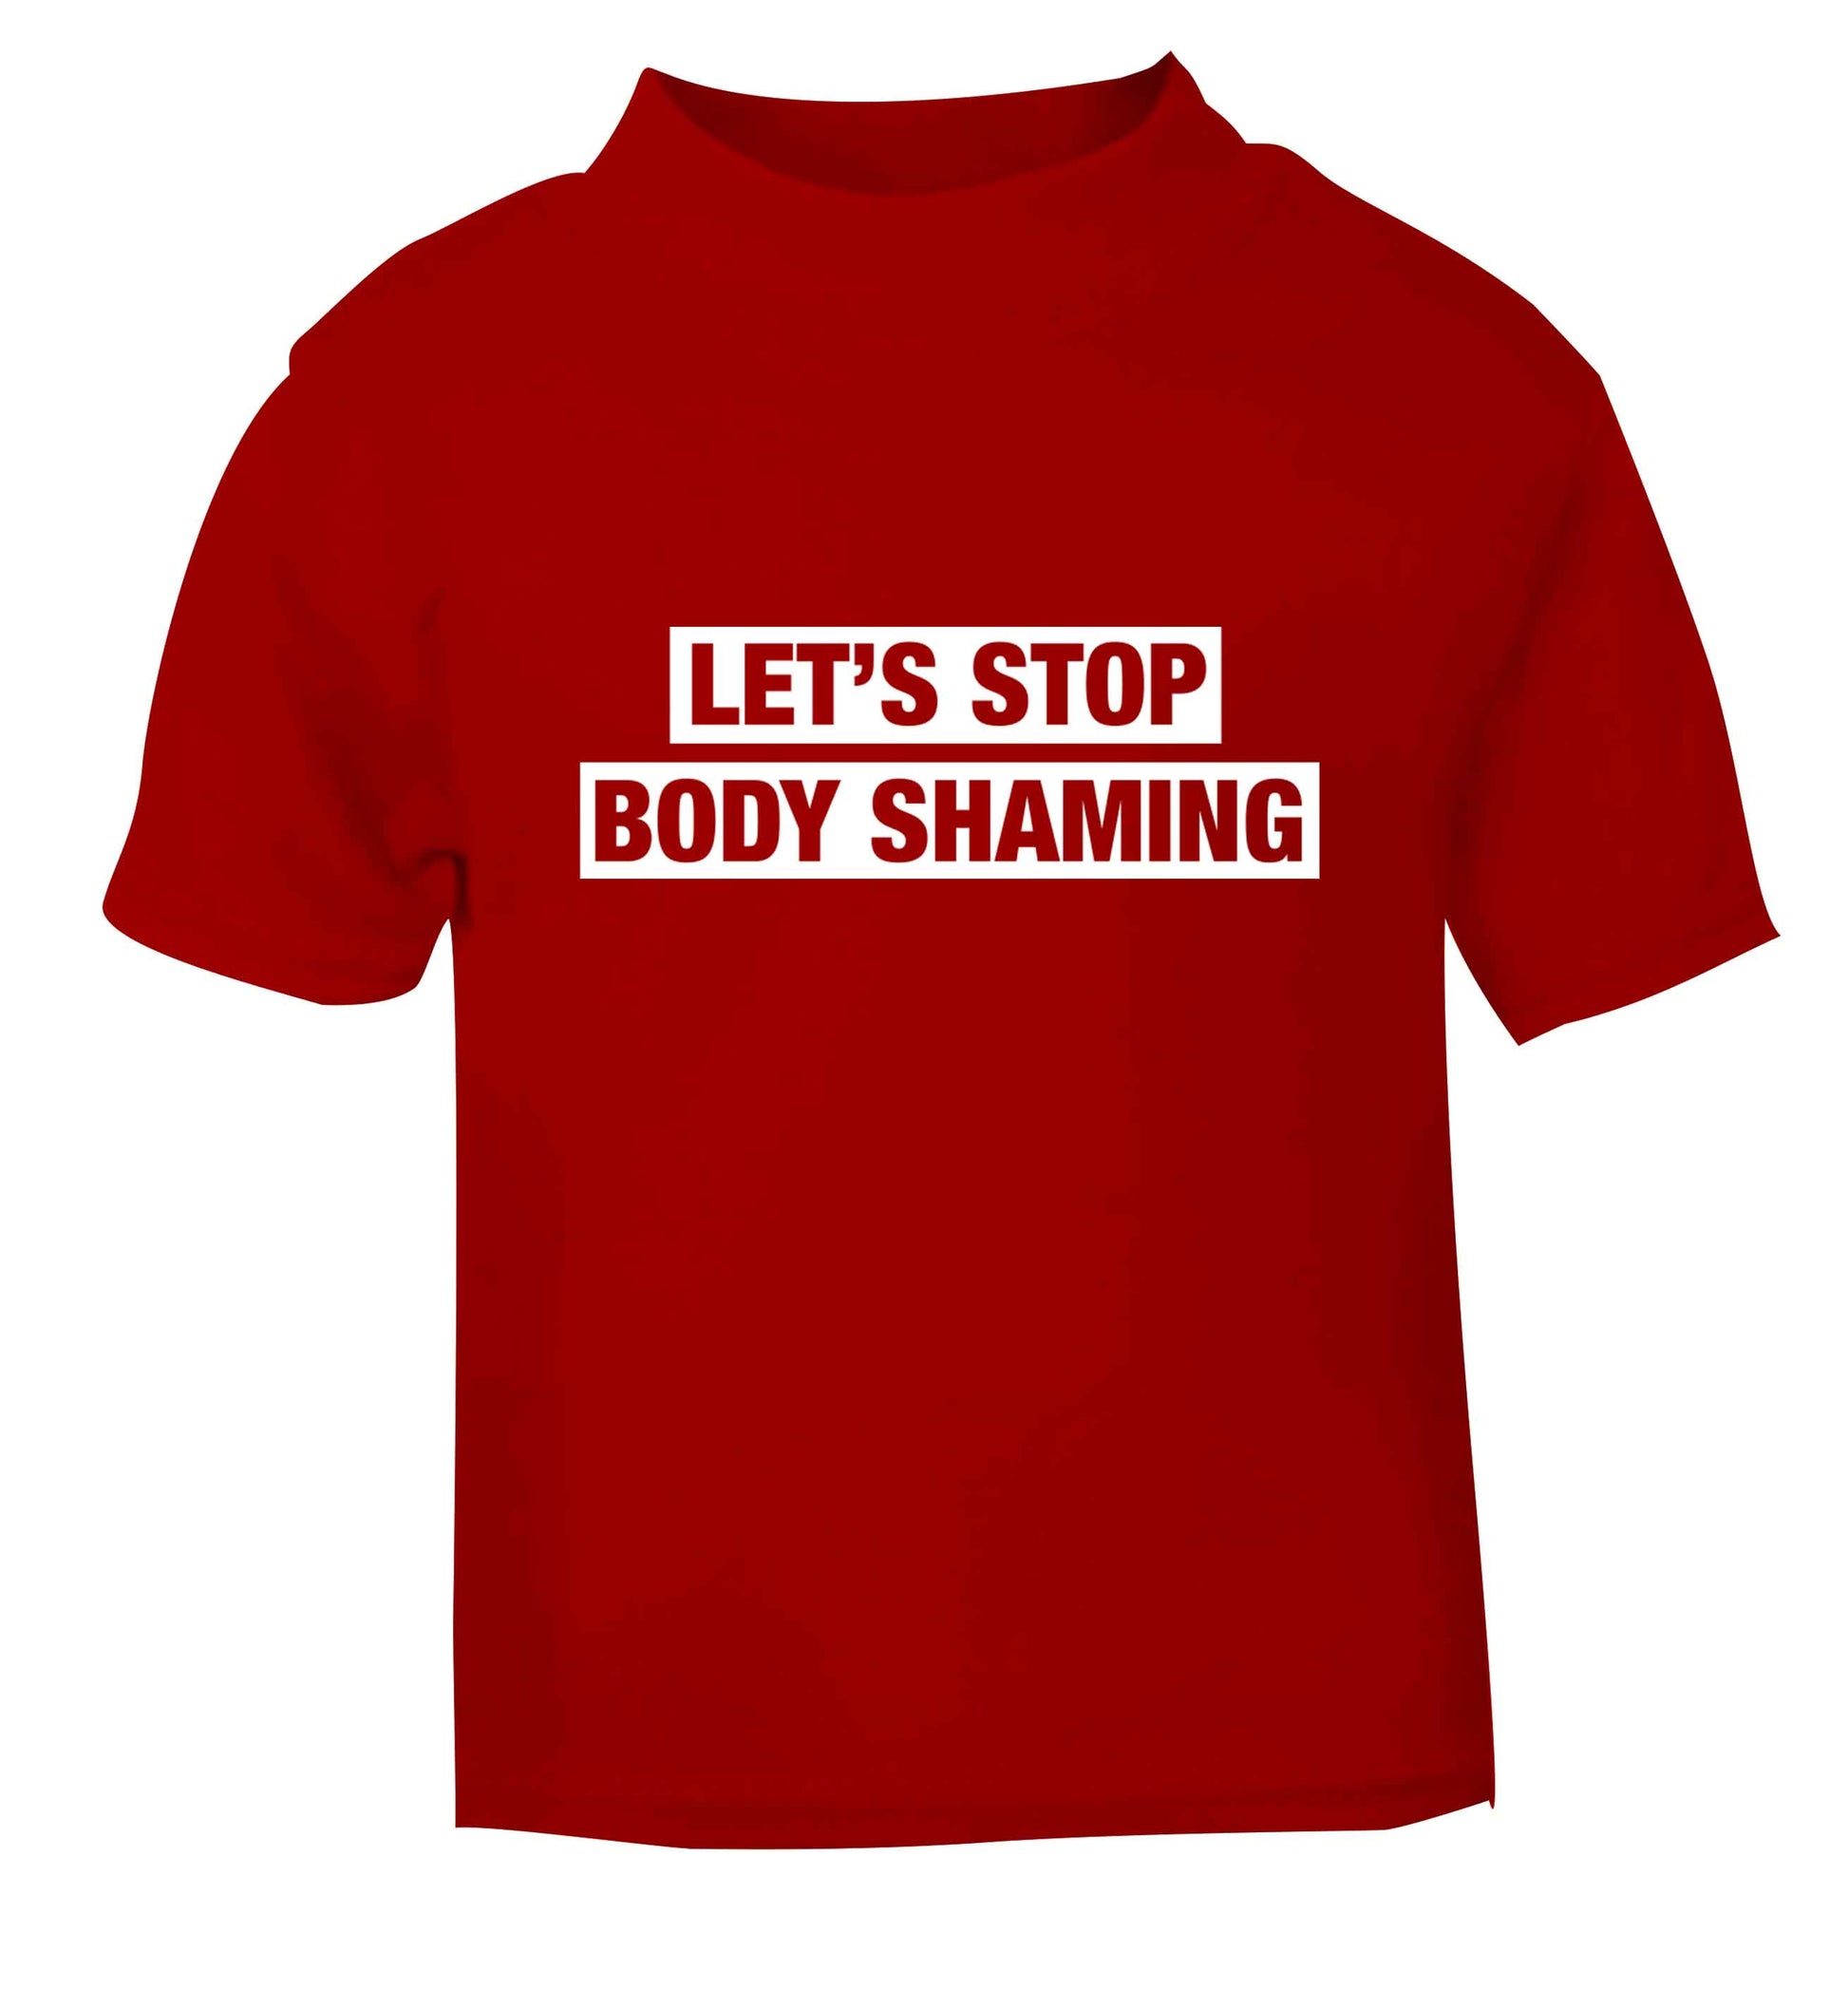 Let's stop body shaming red baby toddler Tshirt 2 Years